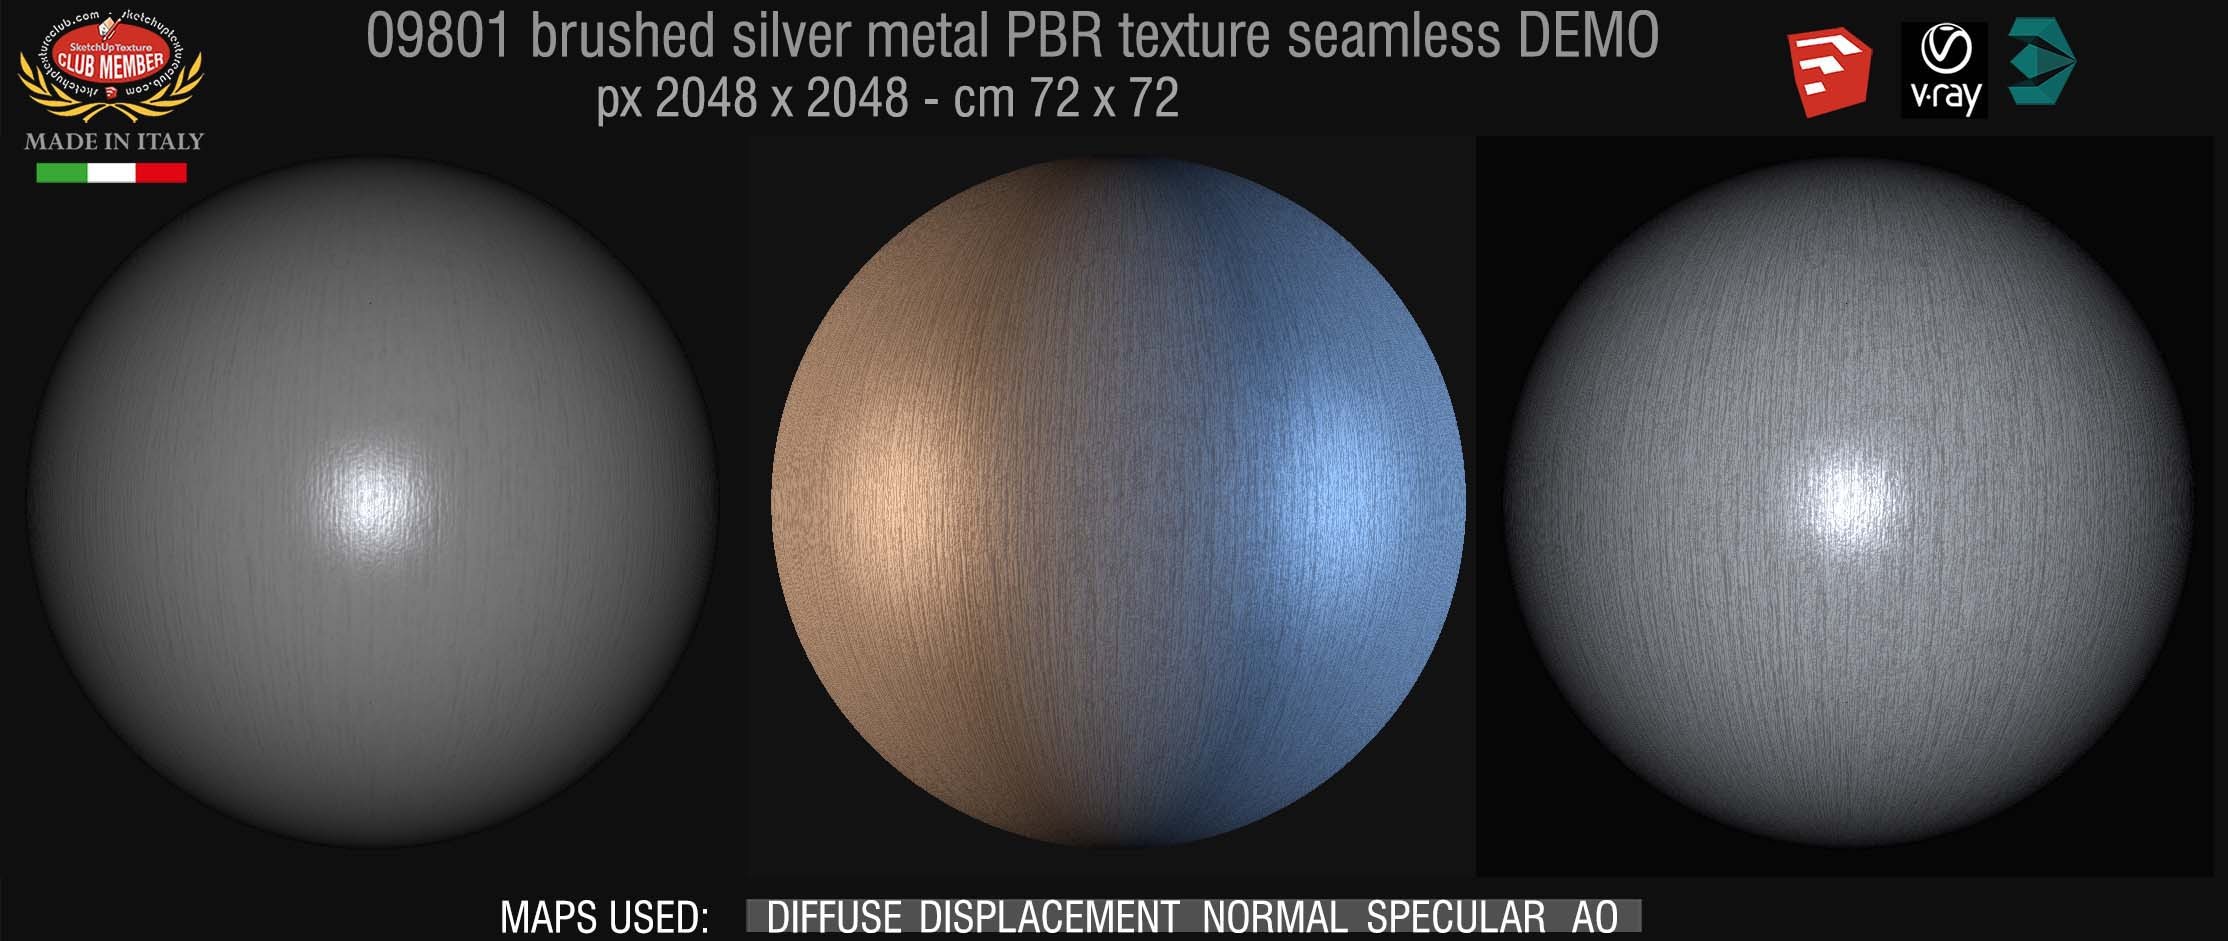 09801 Brushed silver metal PBR texture seamless DEMO